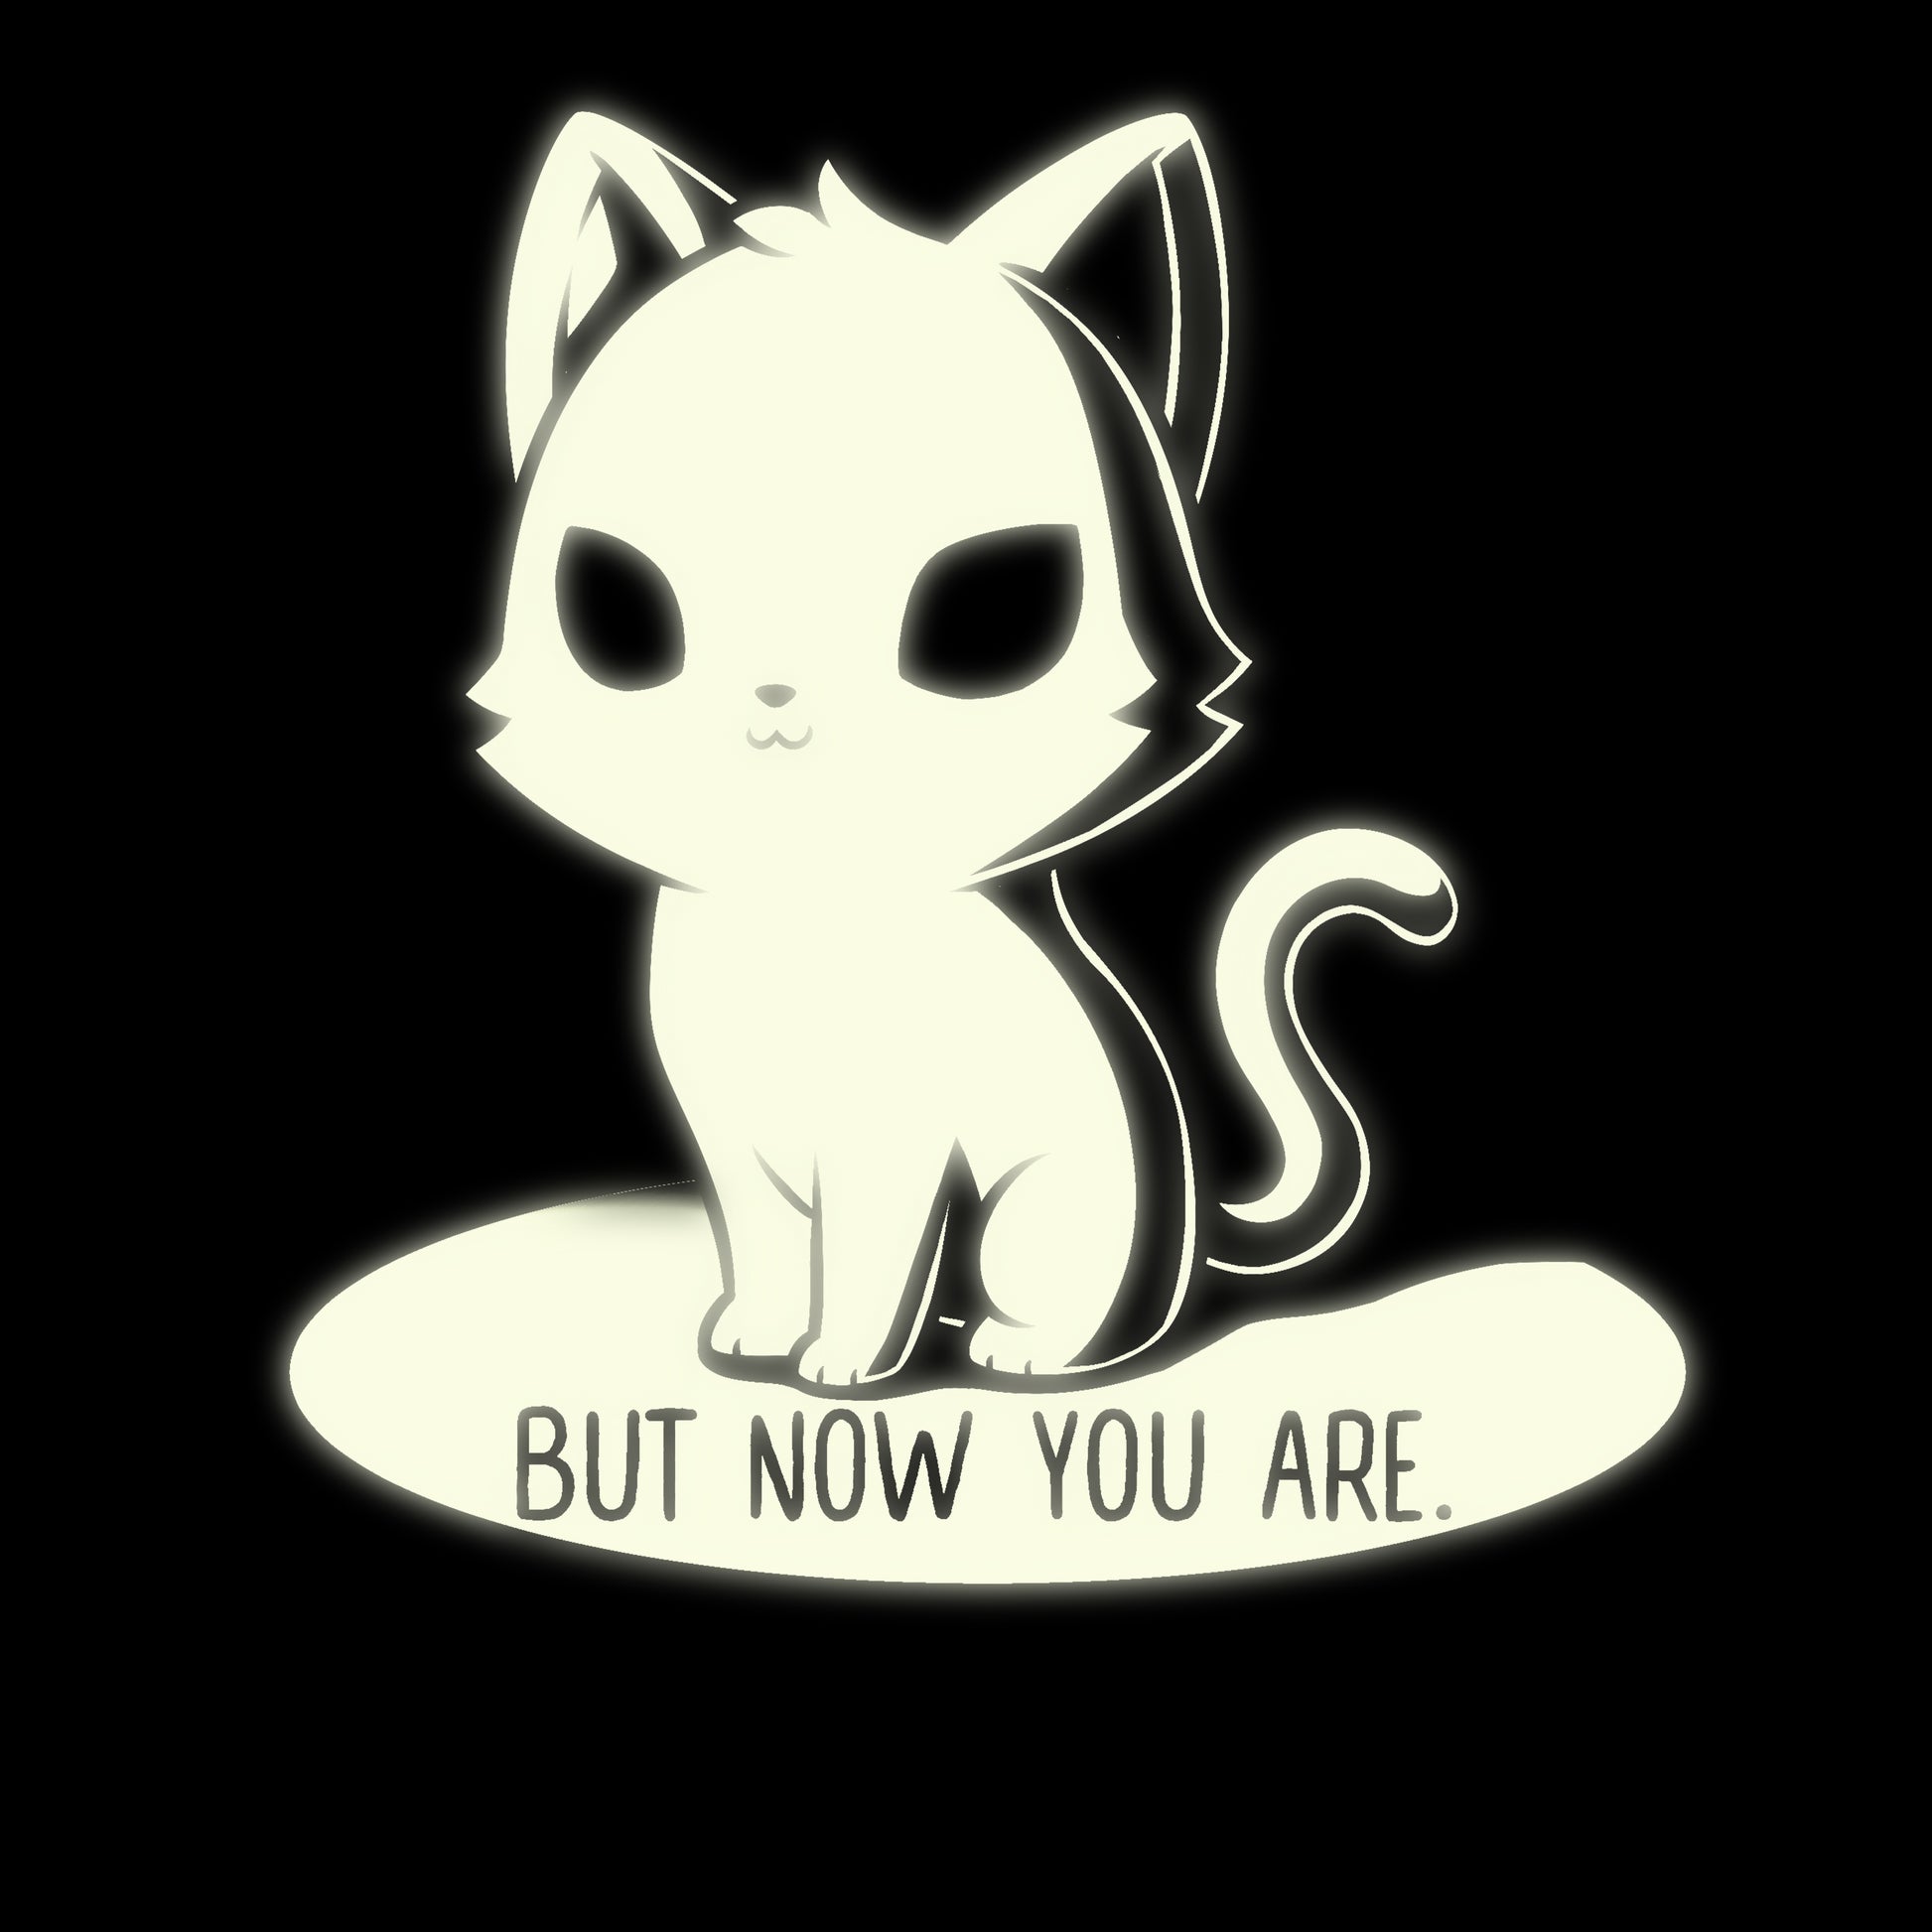 A TeeTurtle Lucky Kitty (Glow) T-shirt featuring a white cat with glow-in-the-dark text saying "but now you are.